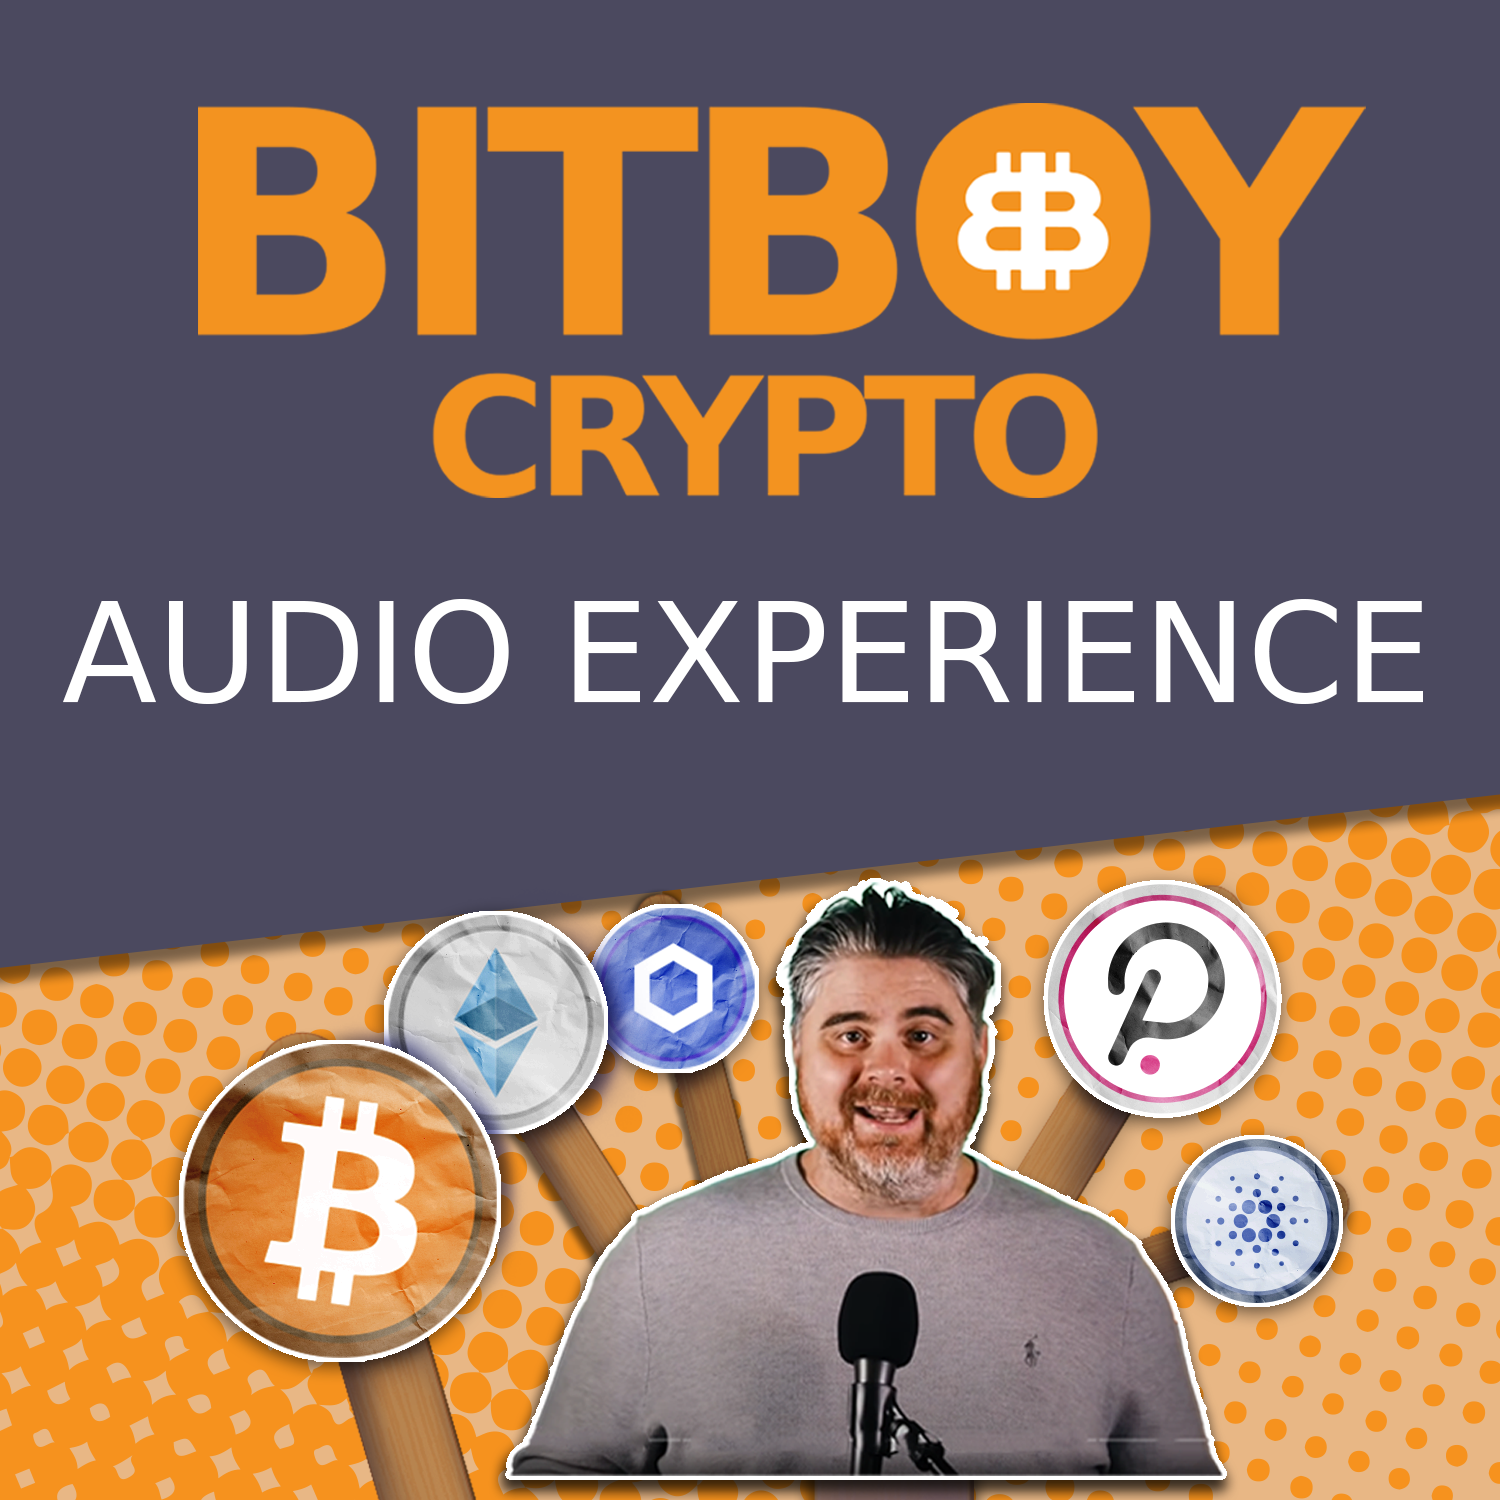 Fresh update on "uh" discussed on The Bitboy Crypto Podcast